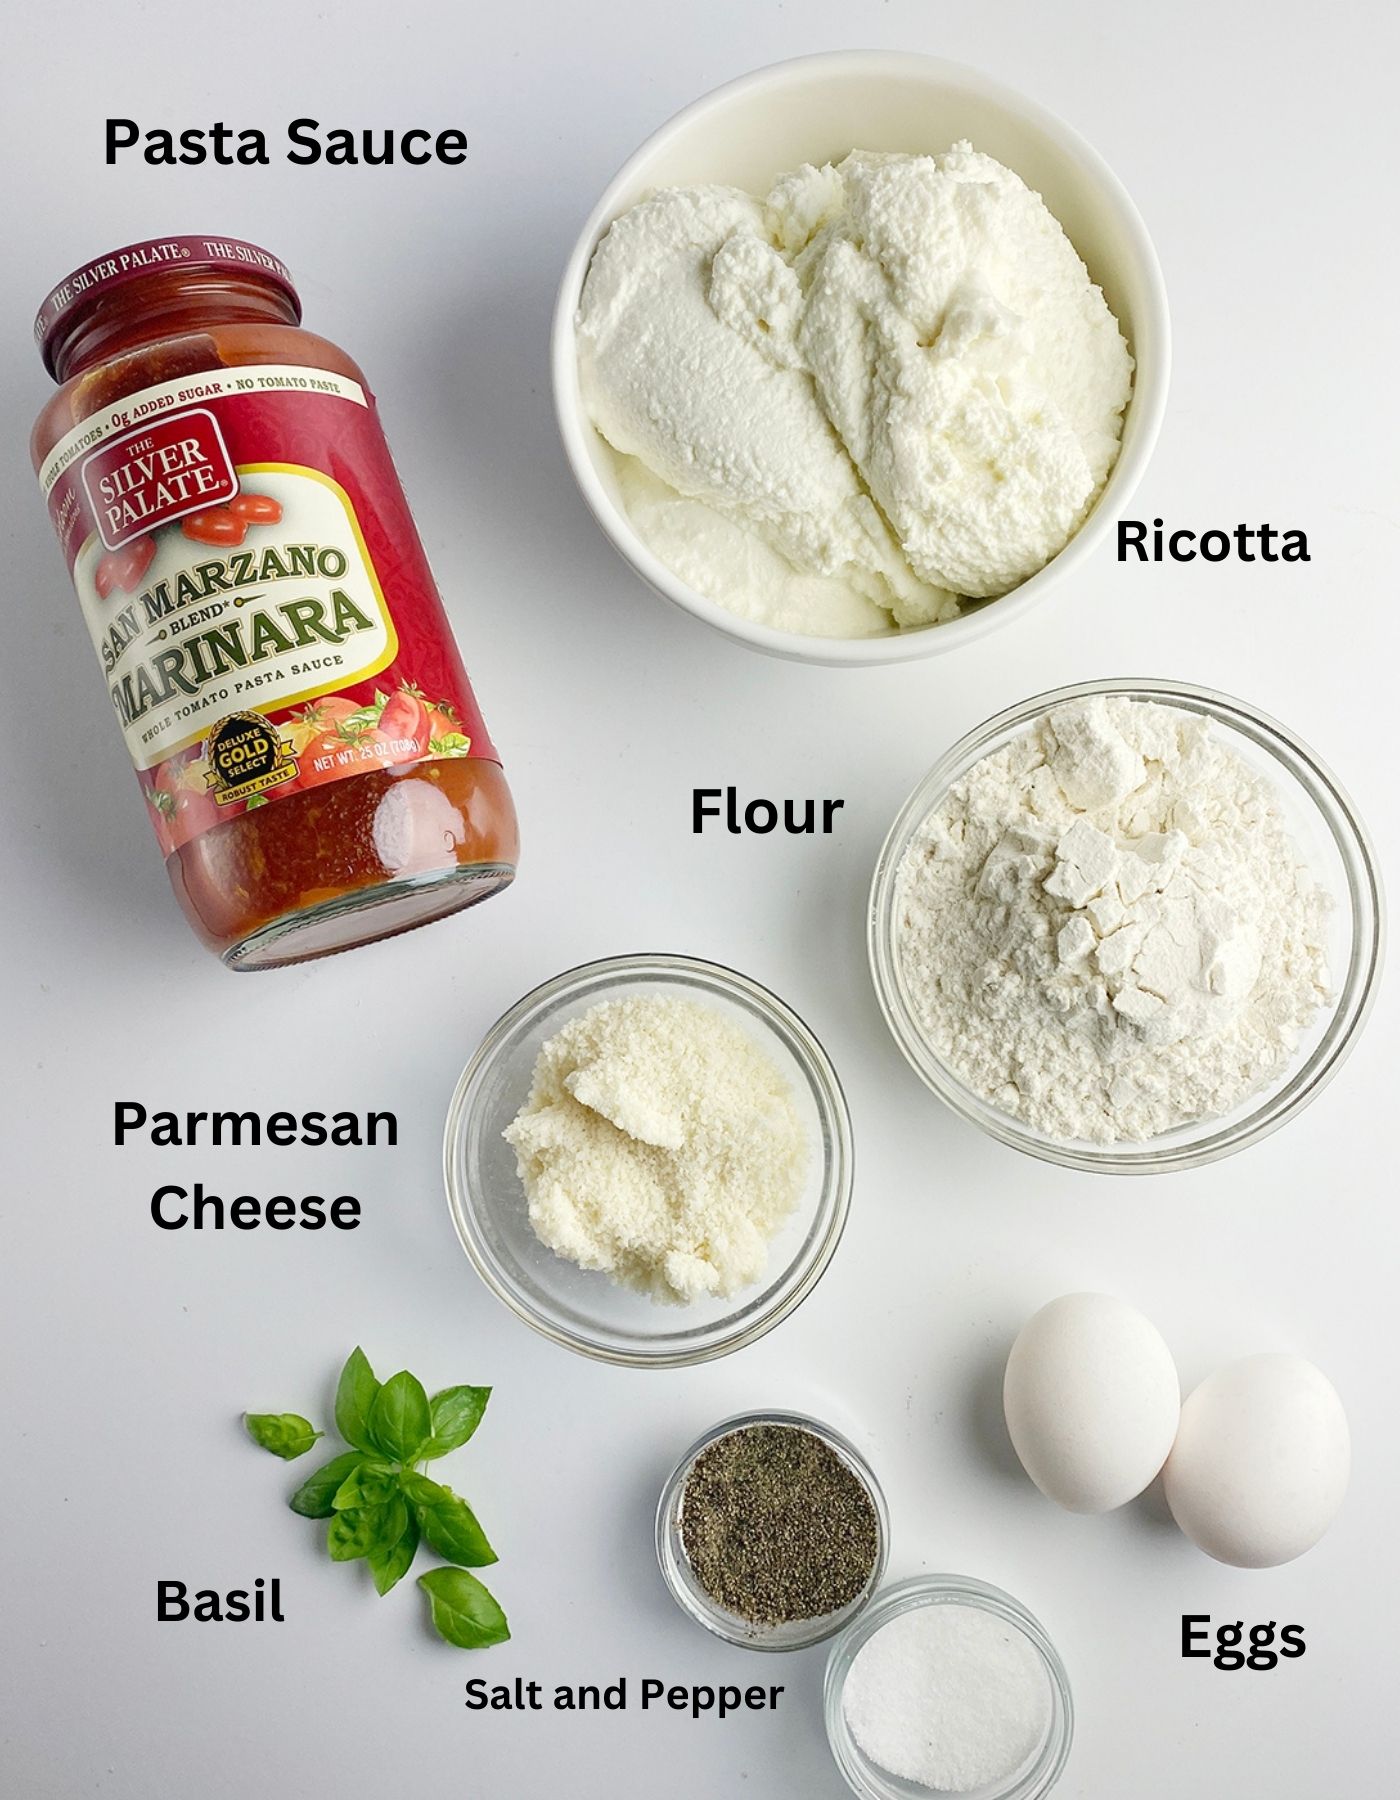 All the ingredients you need to make ricotta dumplings.